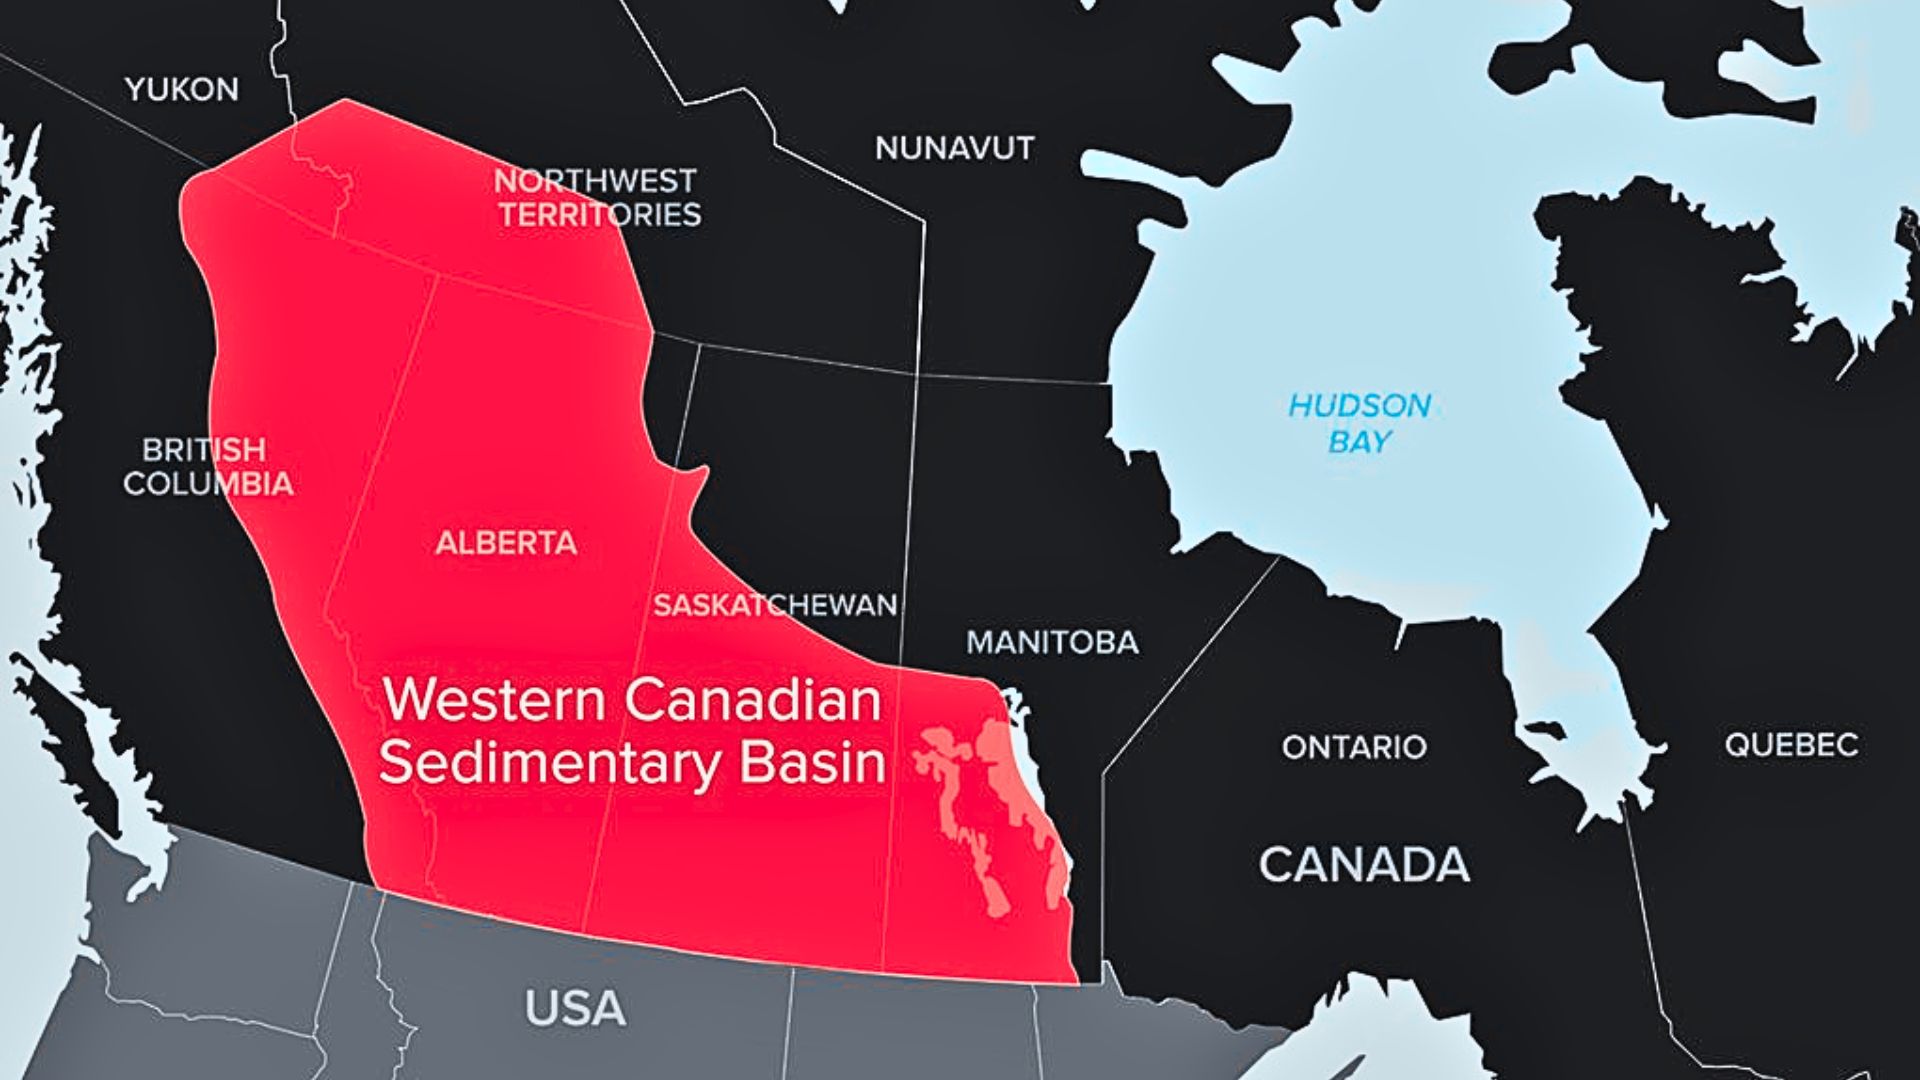 Where is all the conventional oil in Canada?